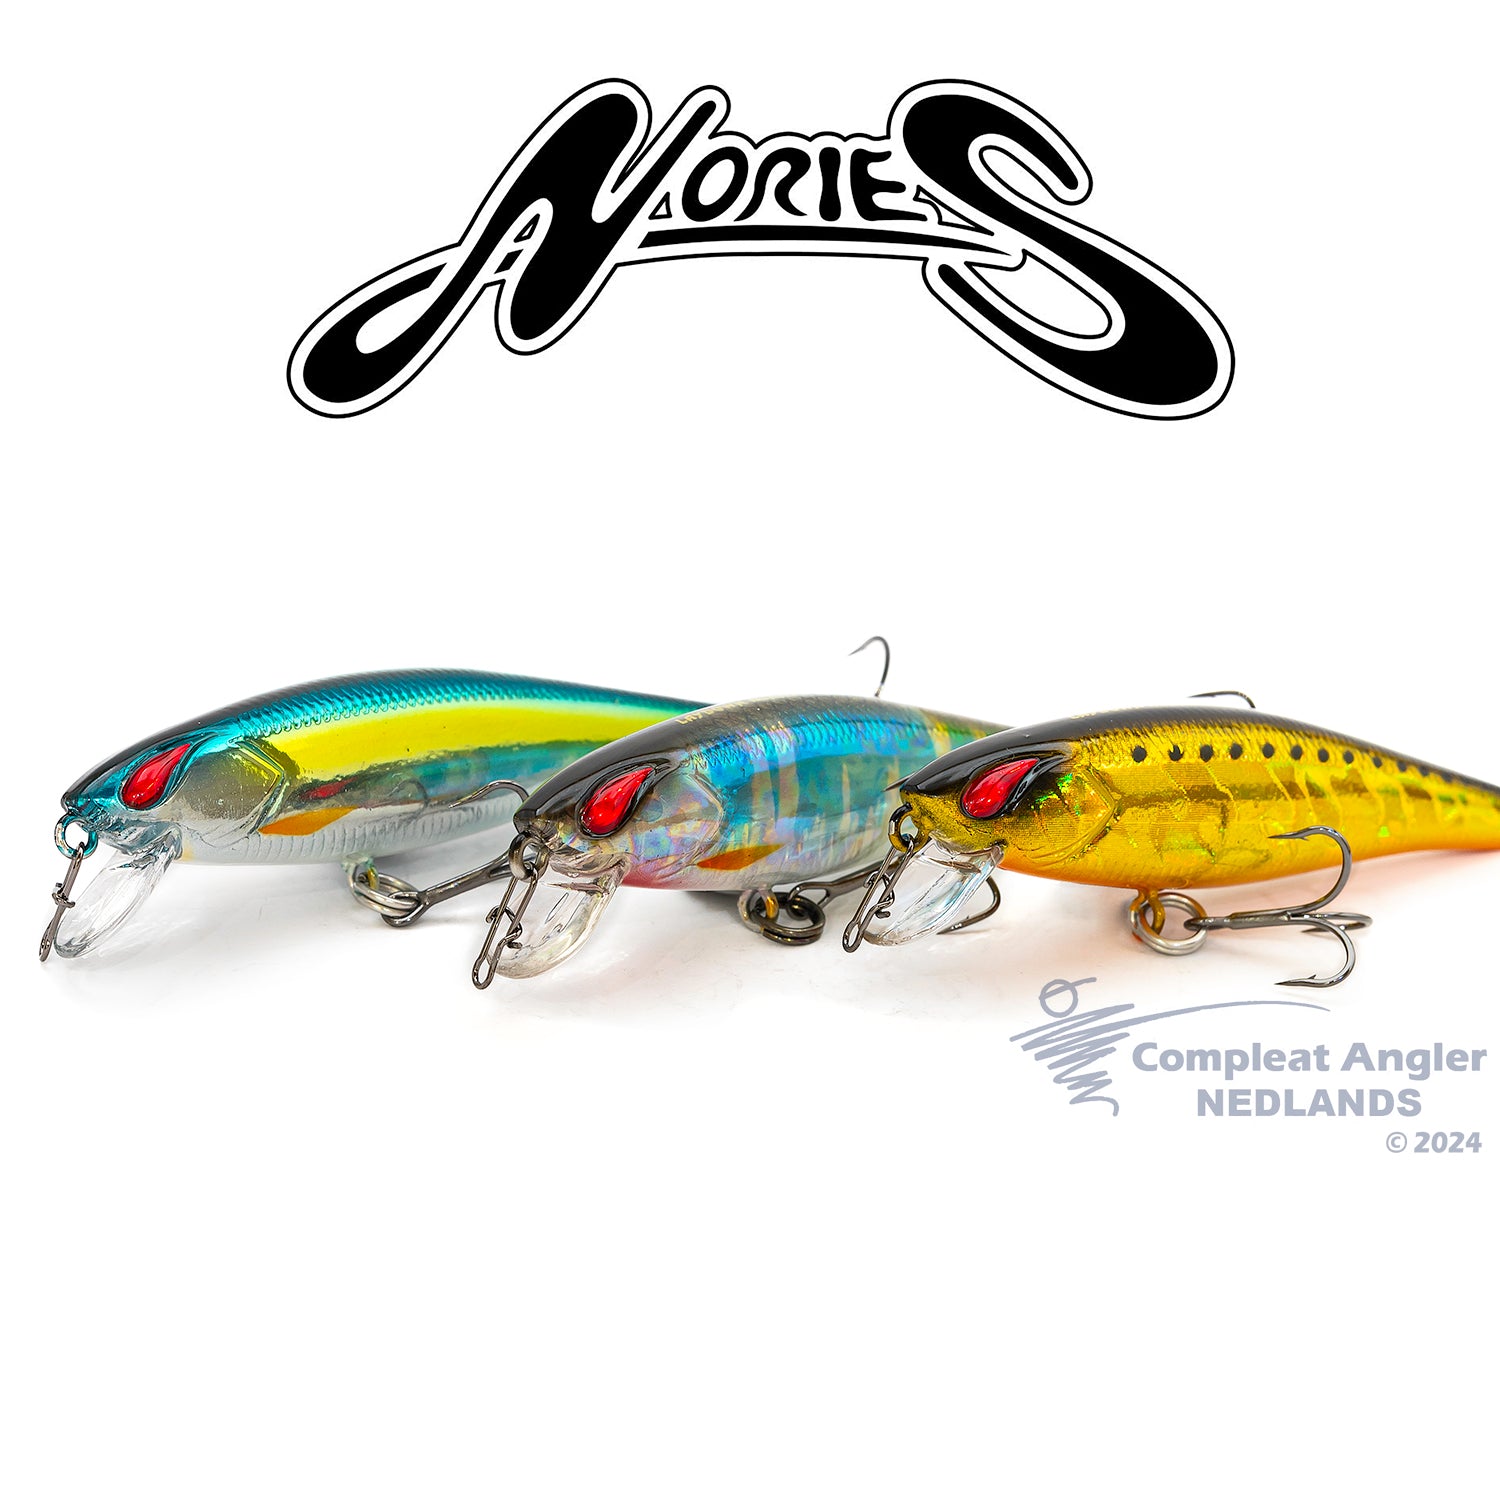 Nories Laydown Minnow Chigyo - Compleat Angler Nedlands Pro Tackle